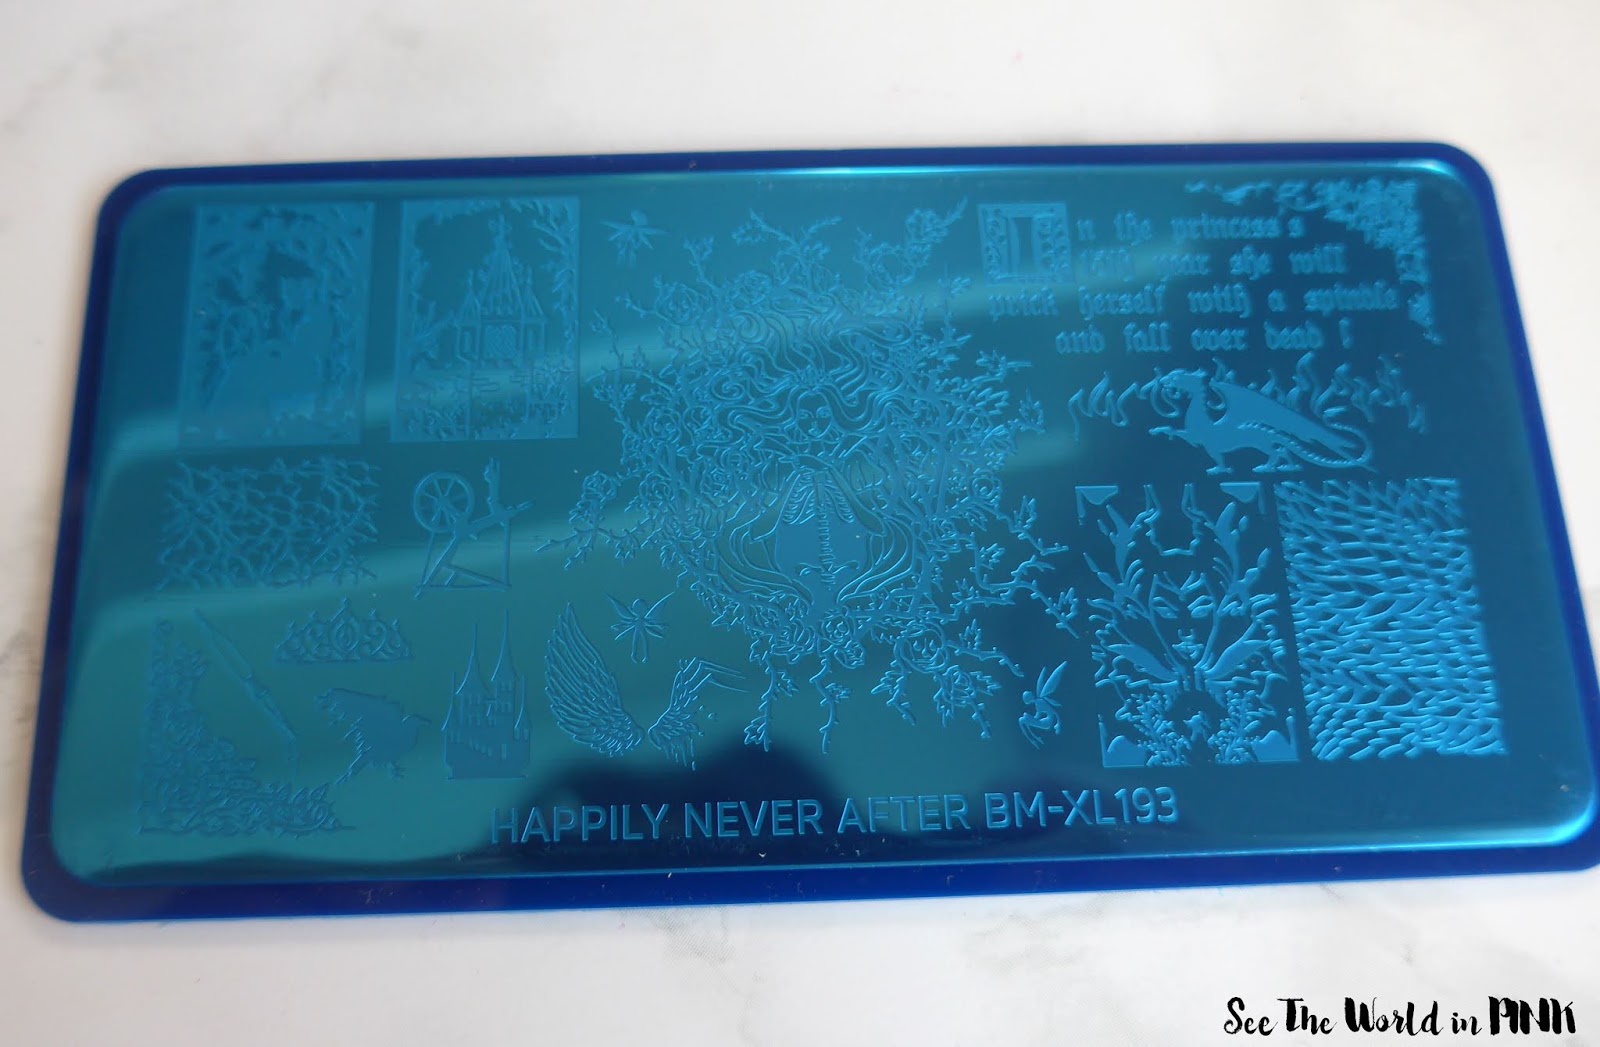 Manicure Monday - "Happily Never After" Haunted Fairytale Nails